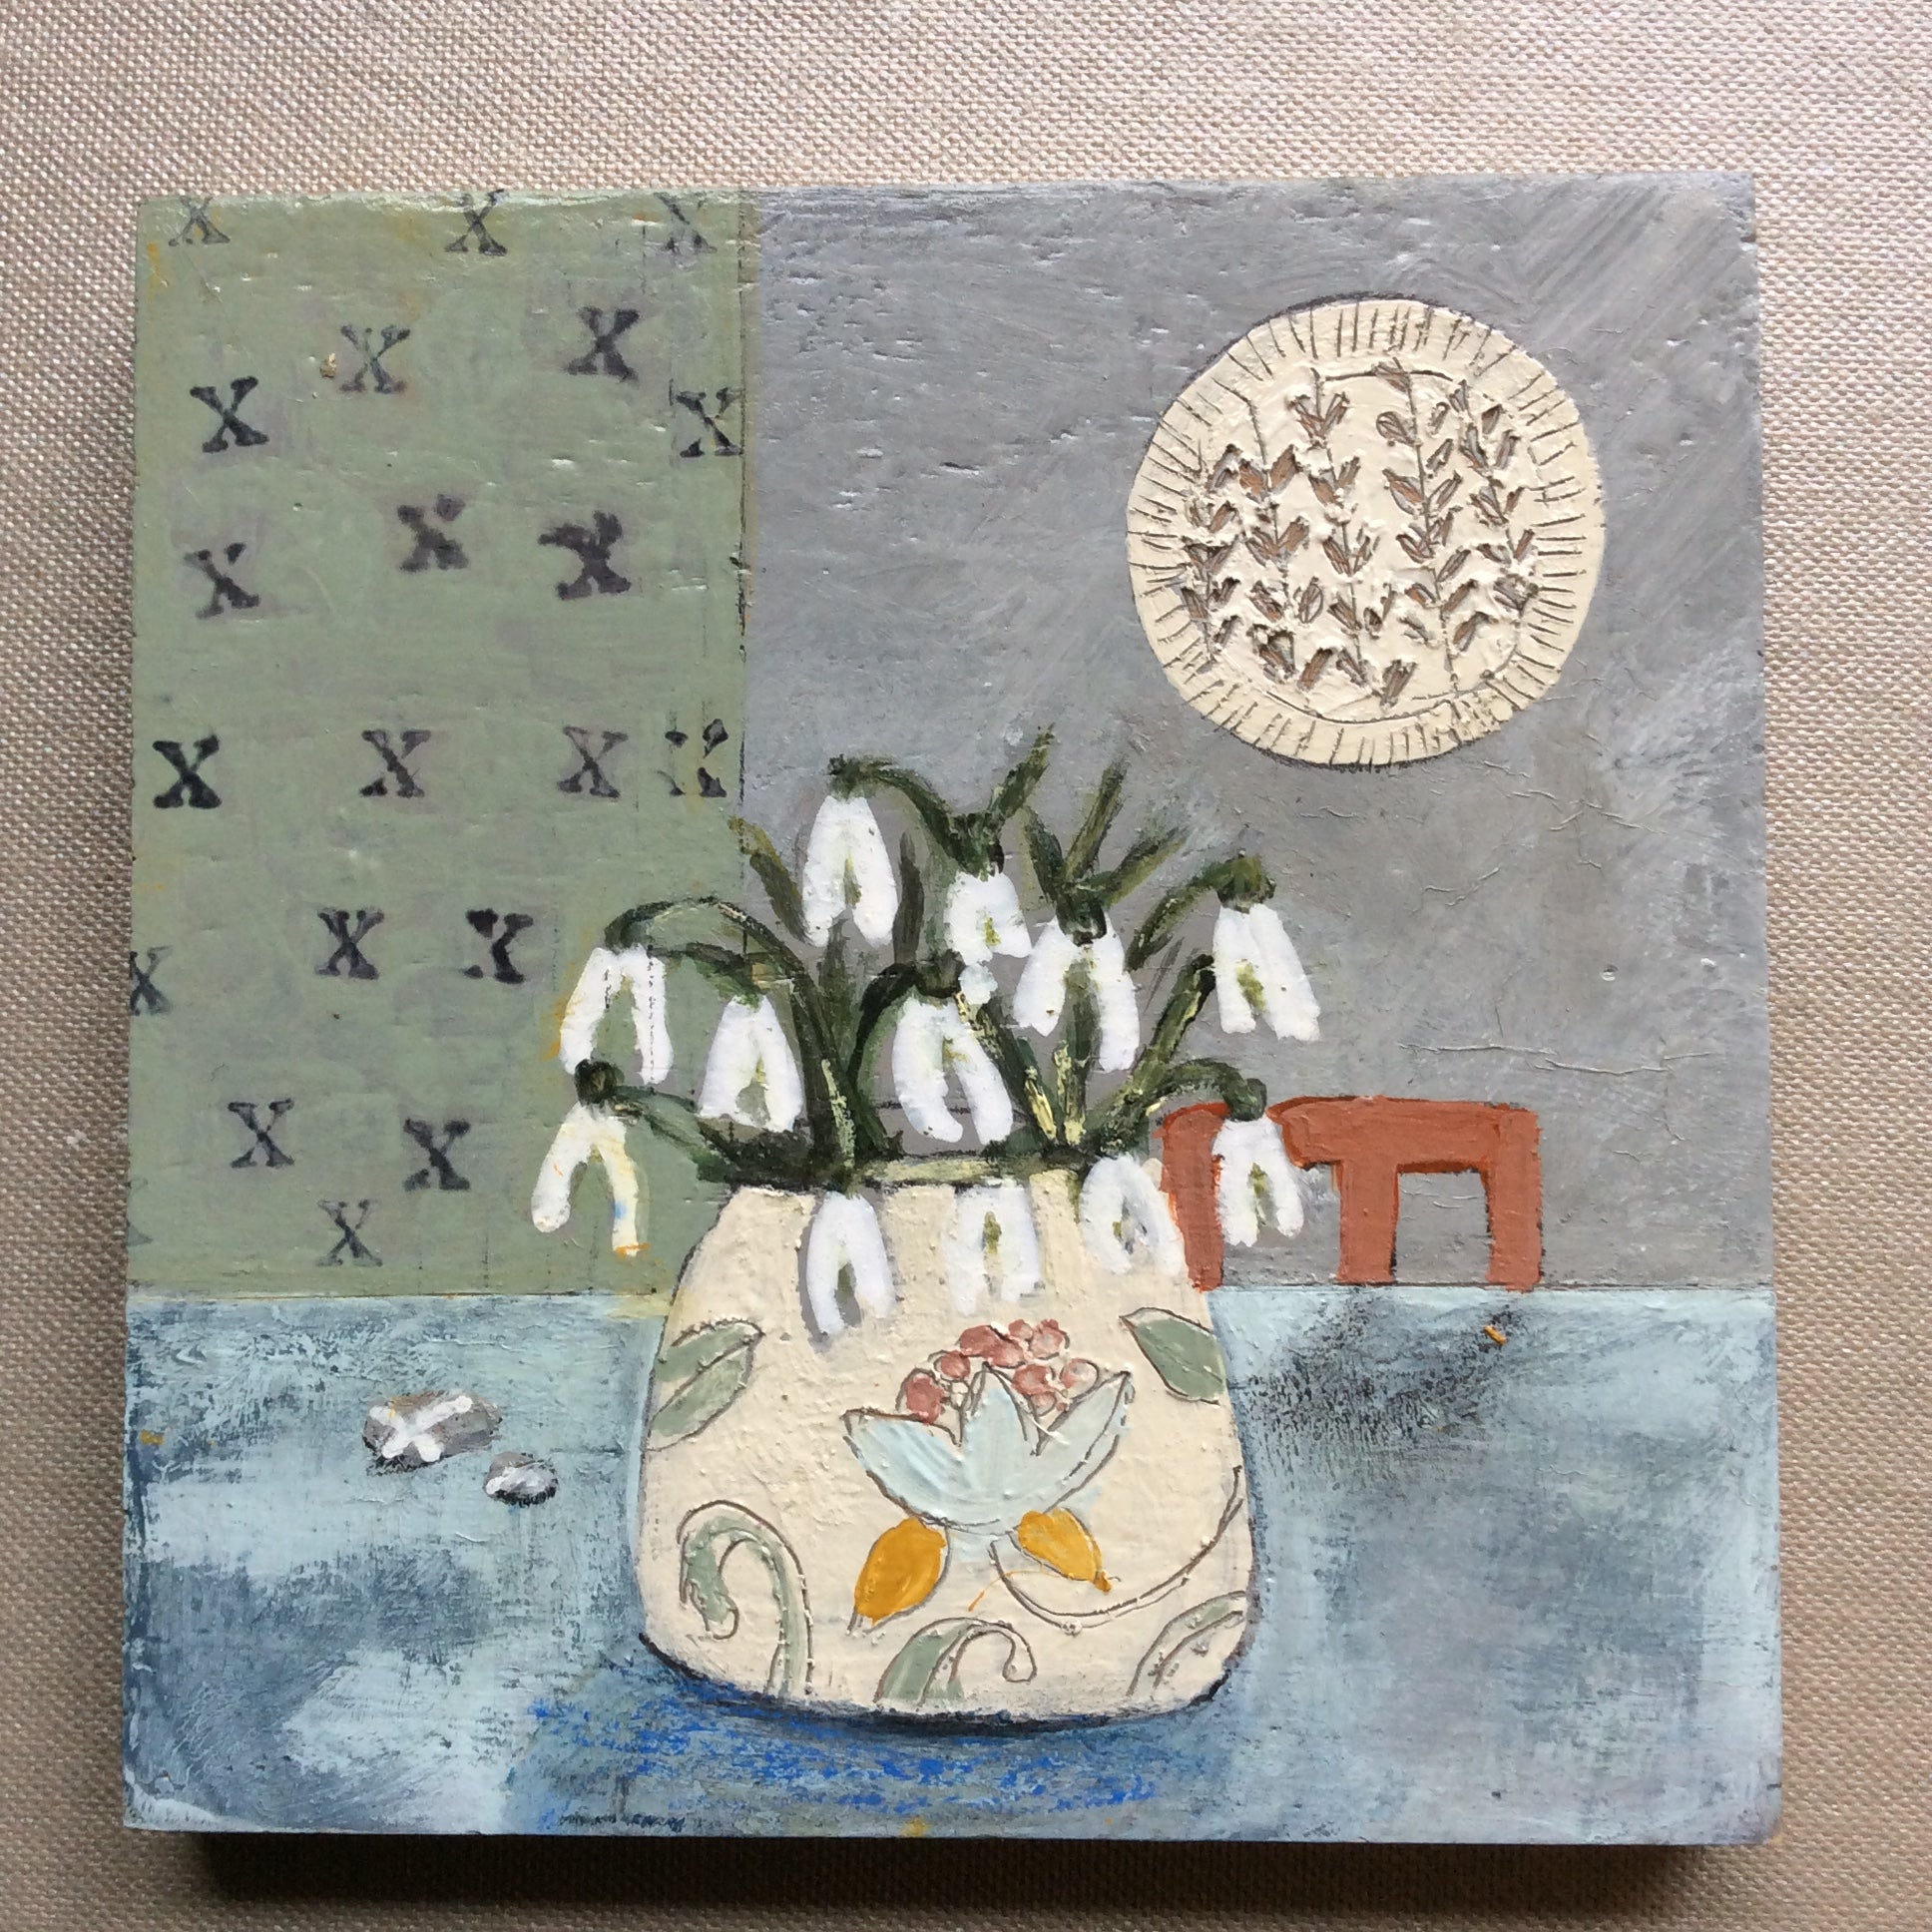 Mixed Media art on wood By Louise O’Hara  “Hanging plate”